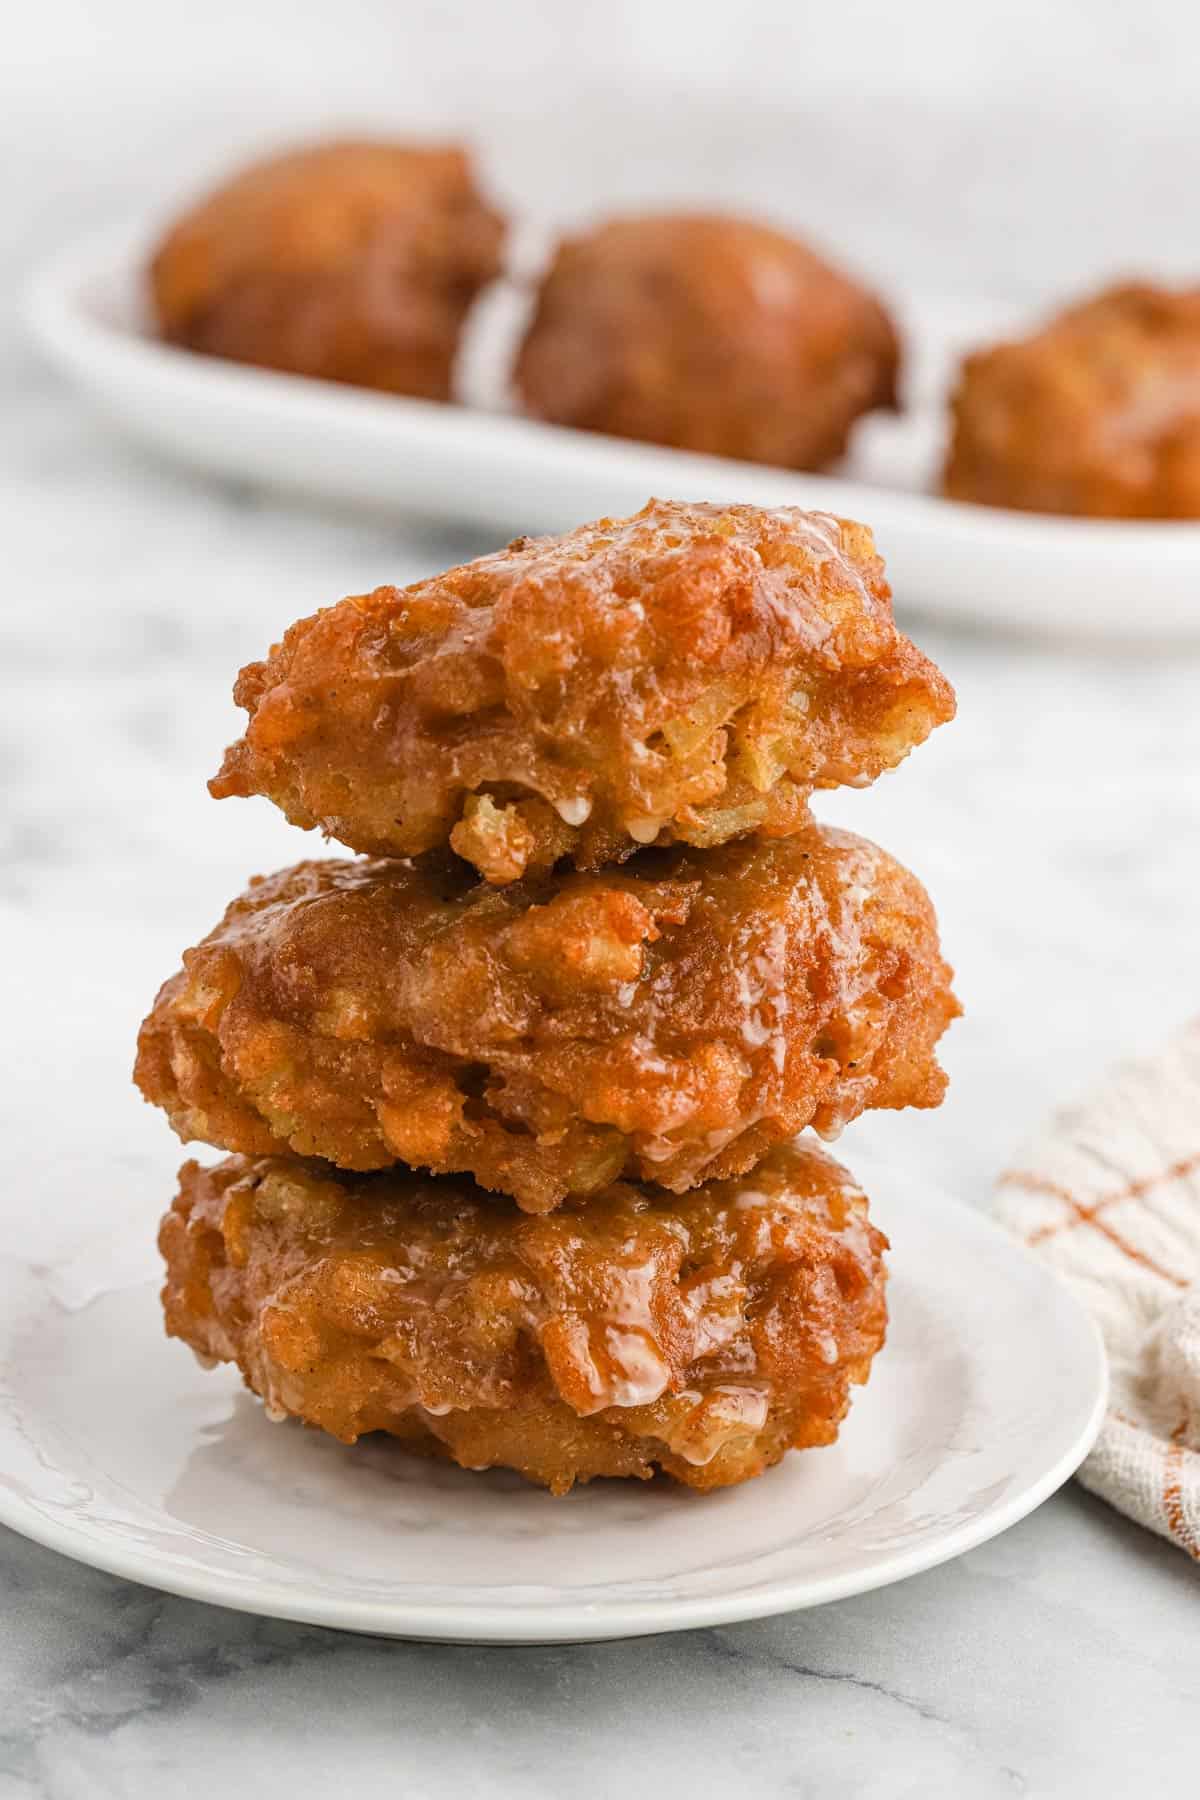 A stack of apple fritters on a plate with more on a tray in the background.